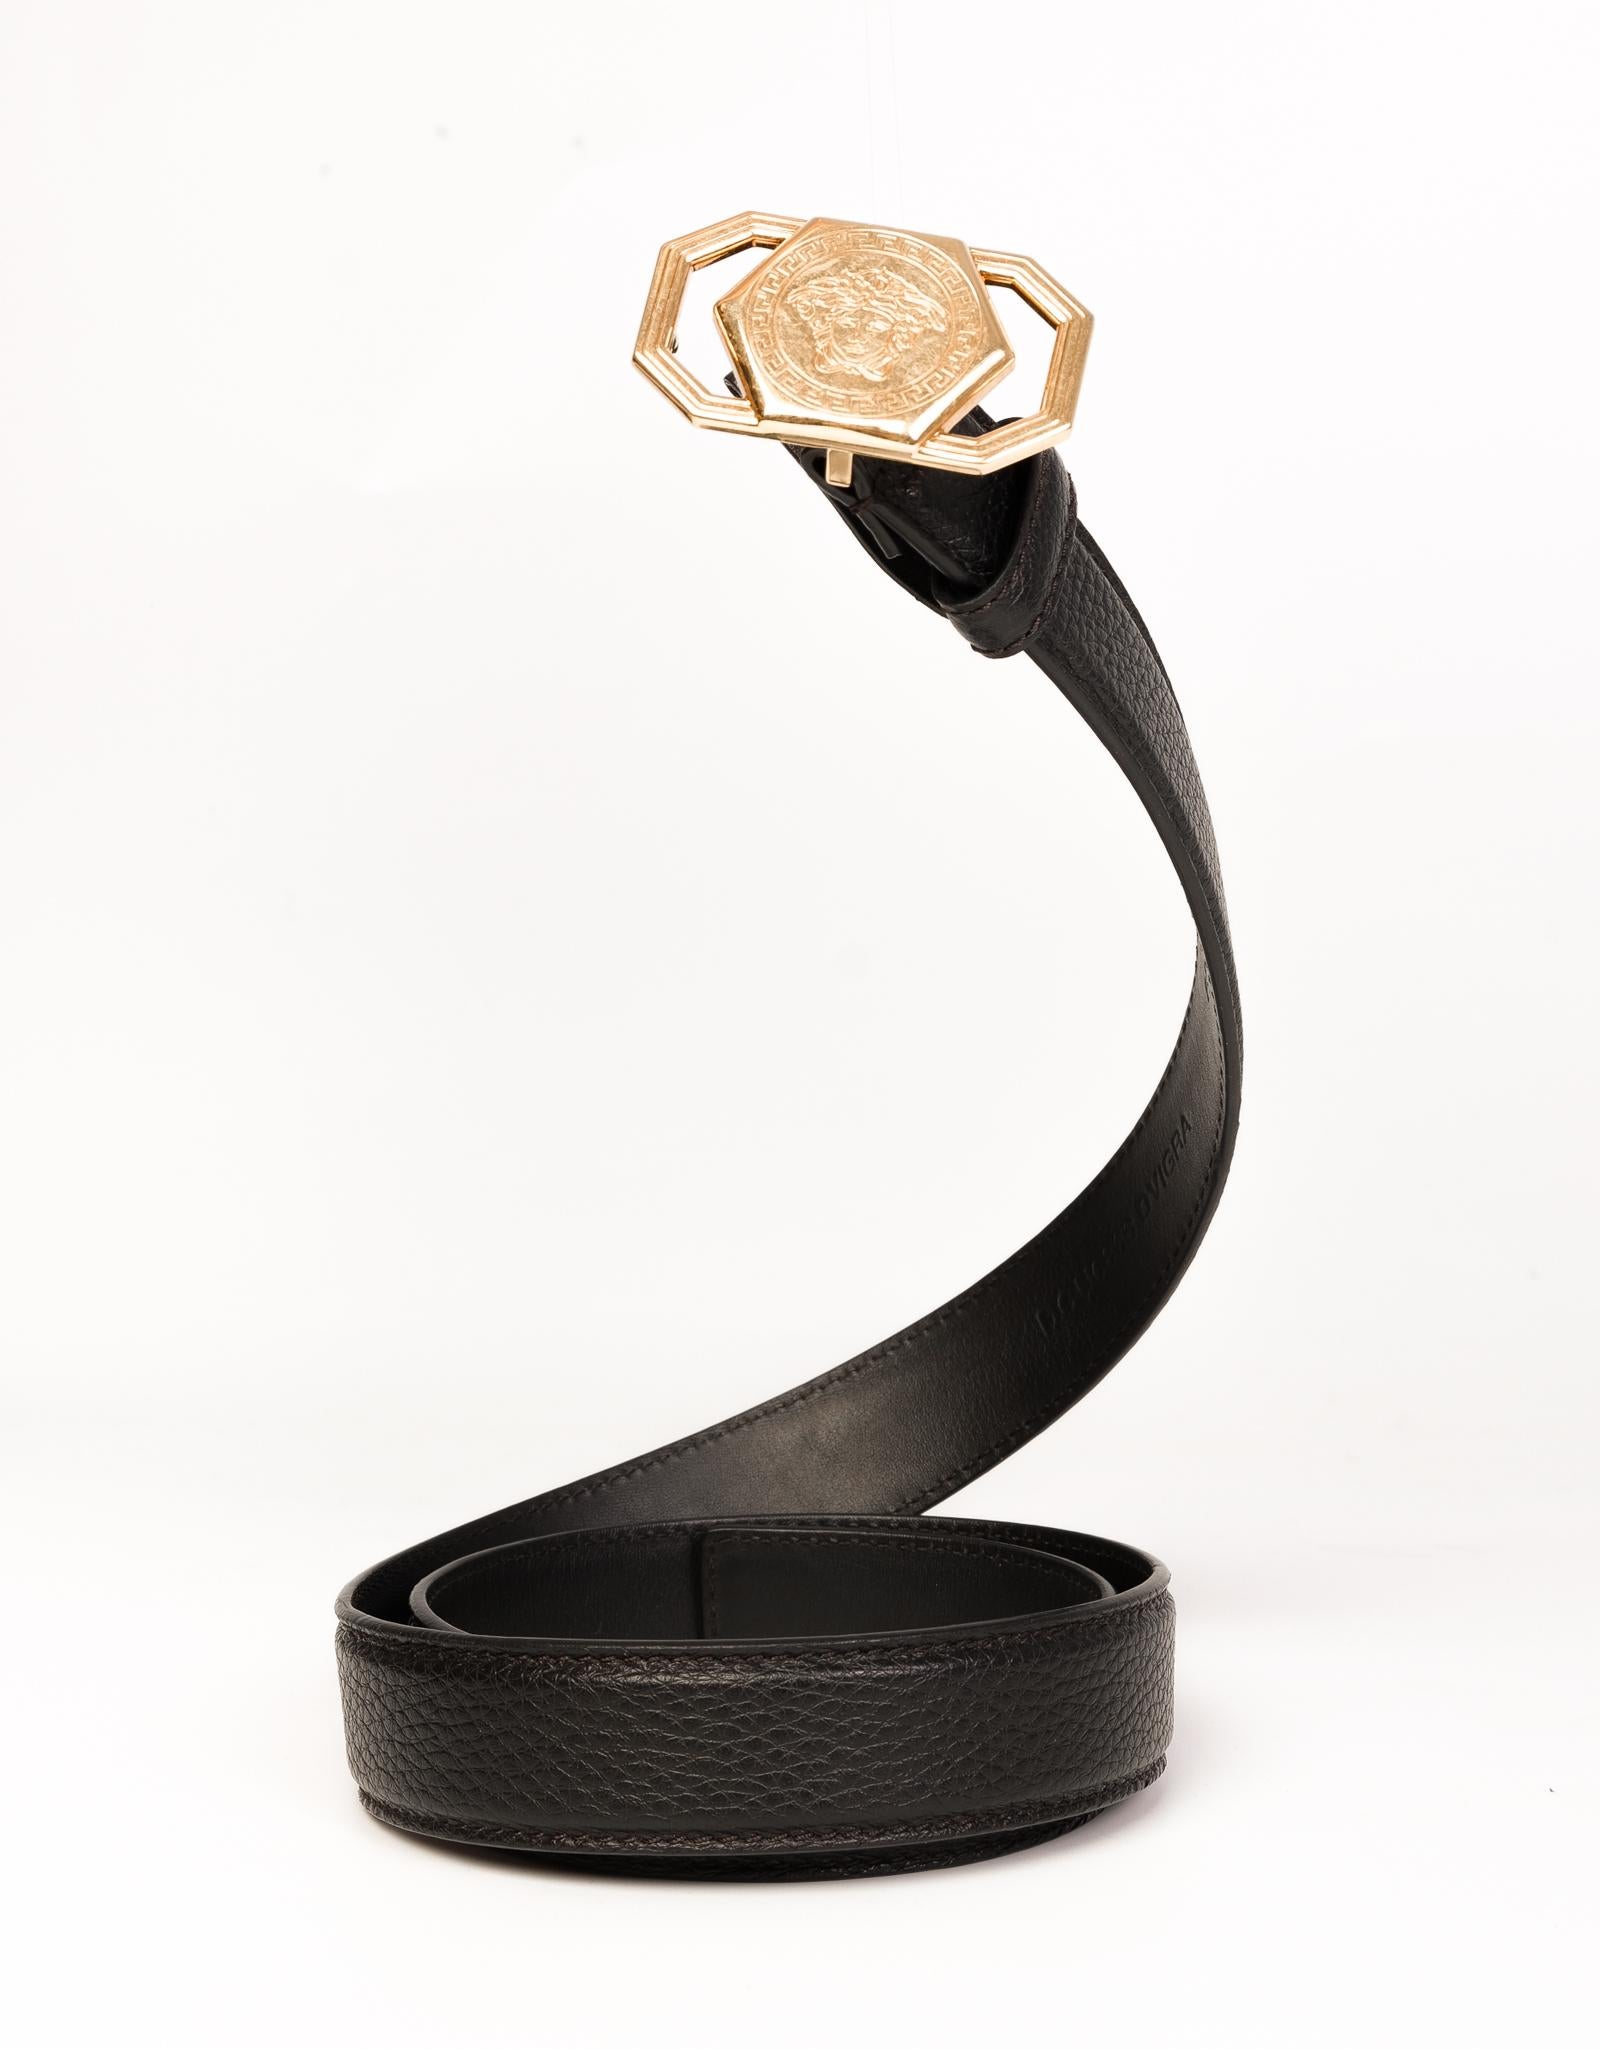 Versace belt in soft black leather and features a Medusa gold-tone buckle and a loop. 

COLOR: Black
MATERIAL: Leather
ITEM CODE: DCU6868.DVIGRA
MEASURES: L 37.5” x W 1”
SIZE: 85/34
CONDITION: Great  - belt shows very small signs of use. 

Made in